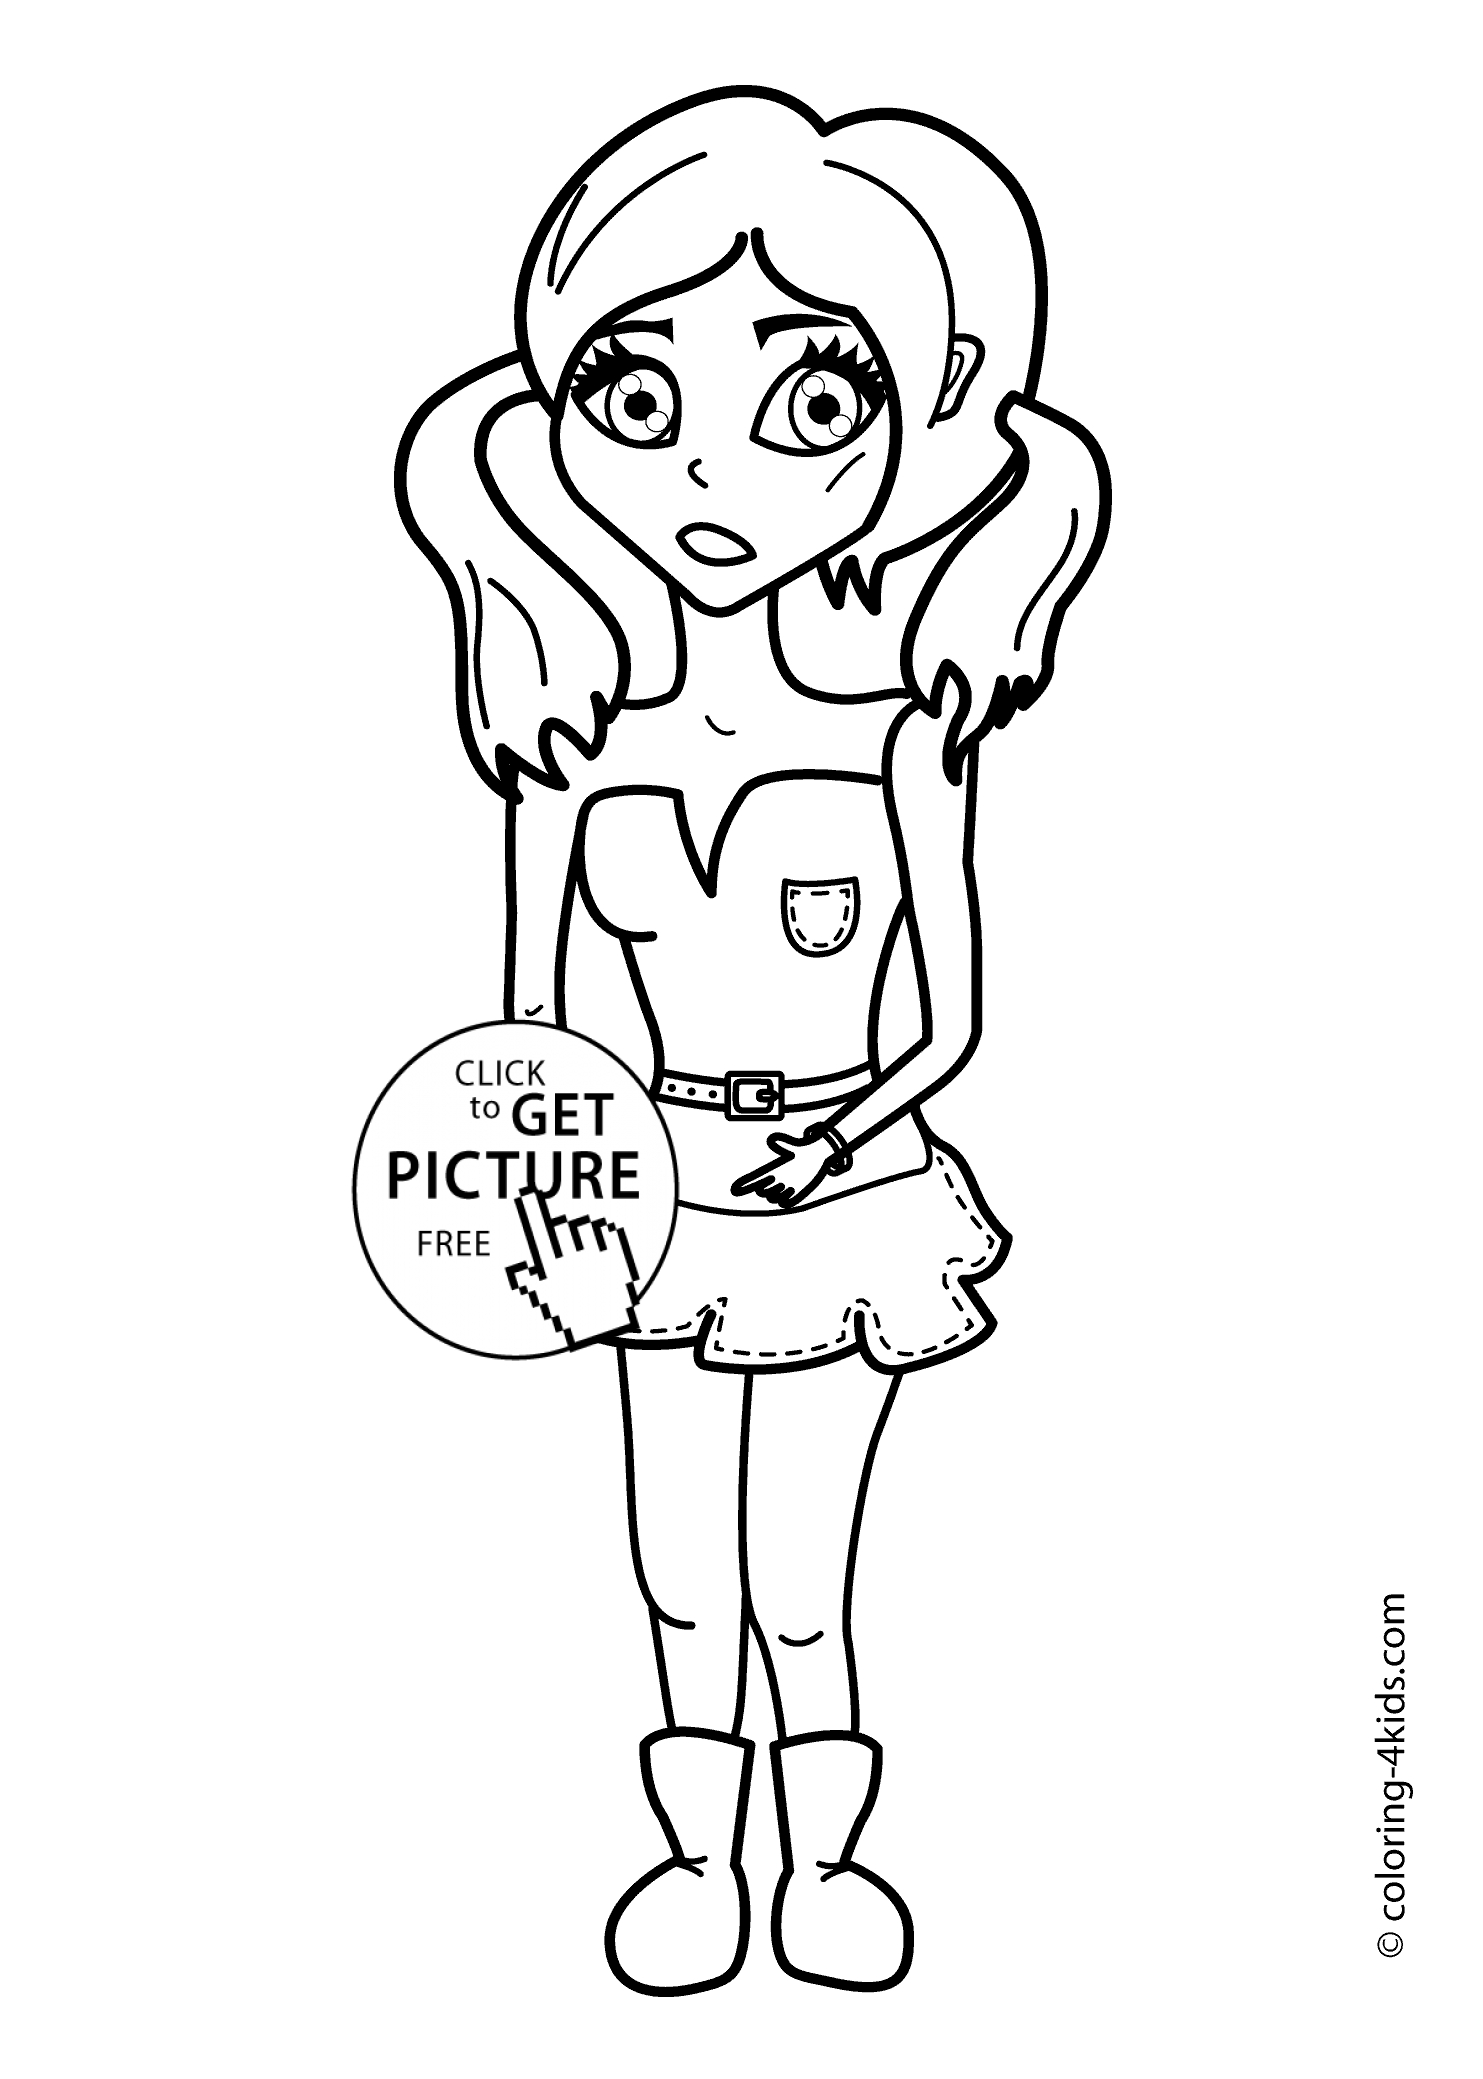 Cute Girl Coloring Pages Cute Coloring Pages For Girls Printable Coloring Pages For Kids Free